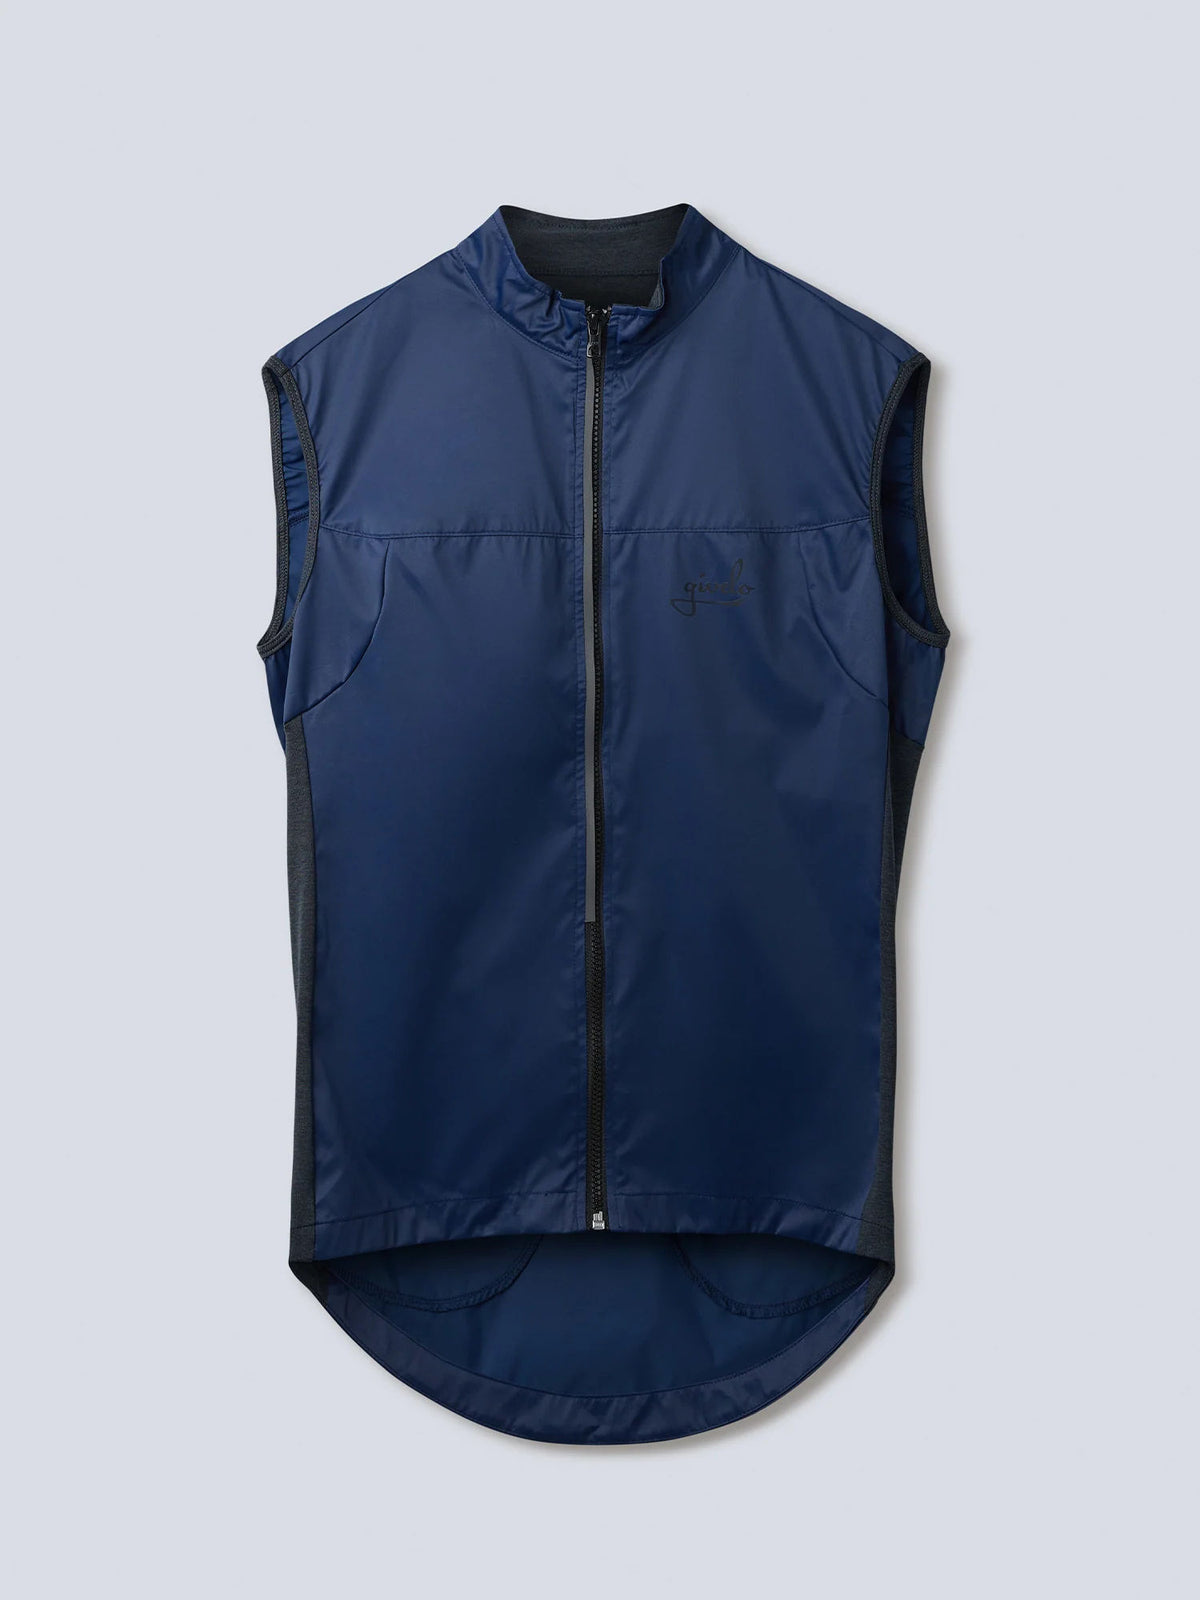 Givelo Quick-Free Gilet Blue メンズ サイクルジレ | GEARED